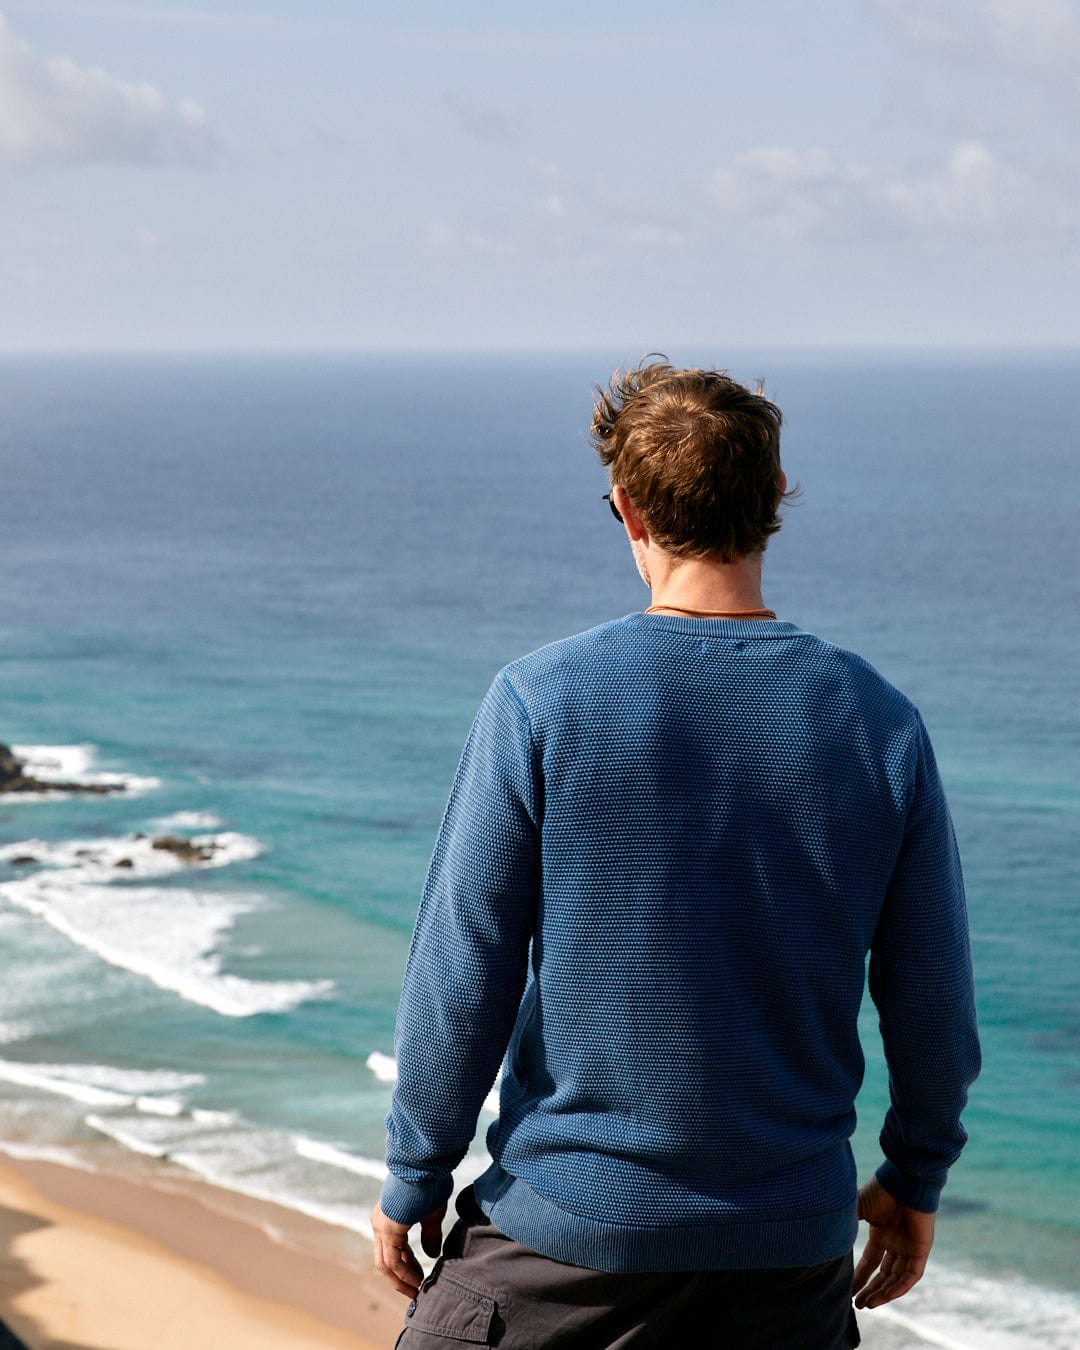 A man standing on a Moss - Mens Washed Knitted Crew - Blue cliff overlooking the blue ocean. (Saltrock)